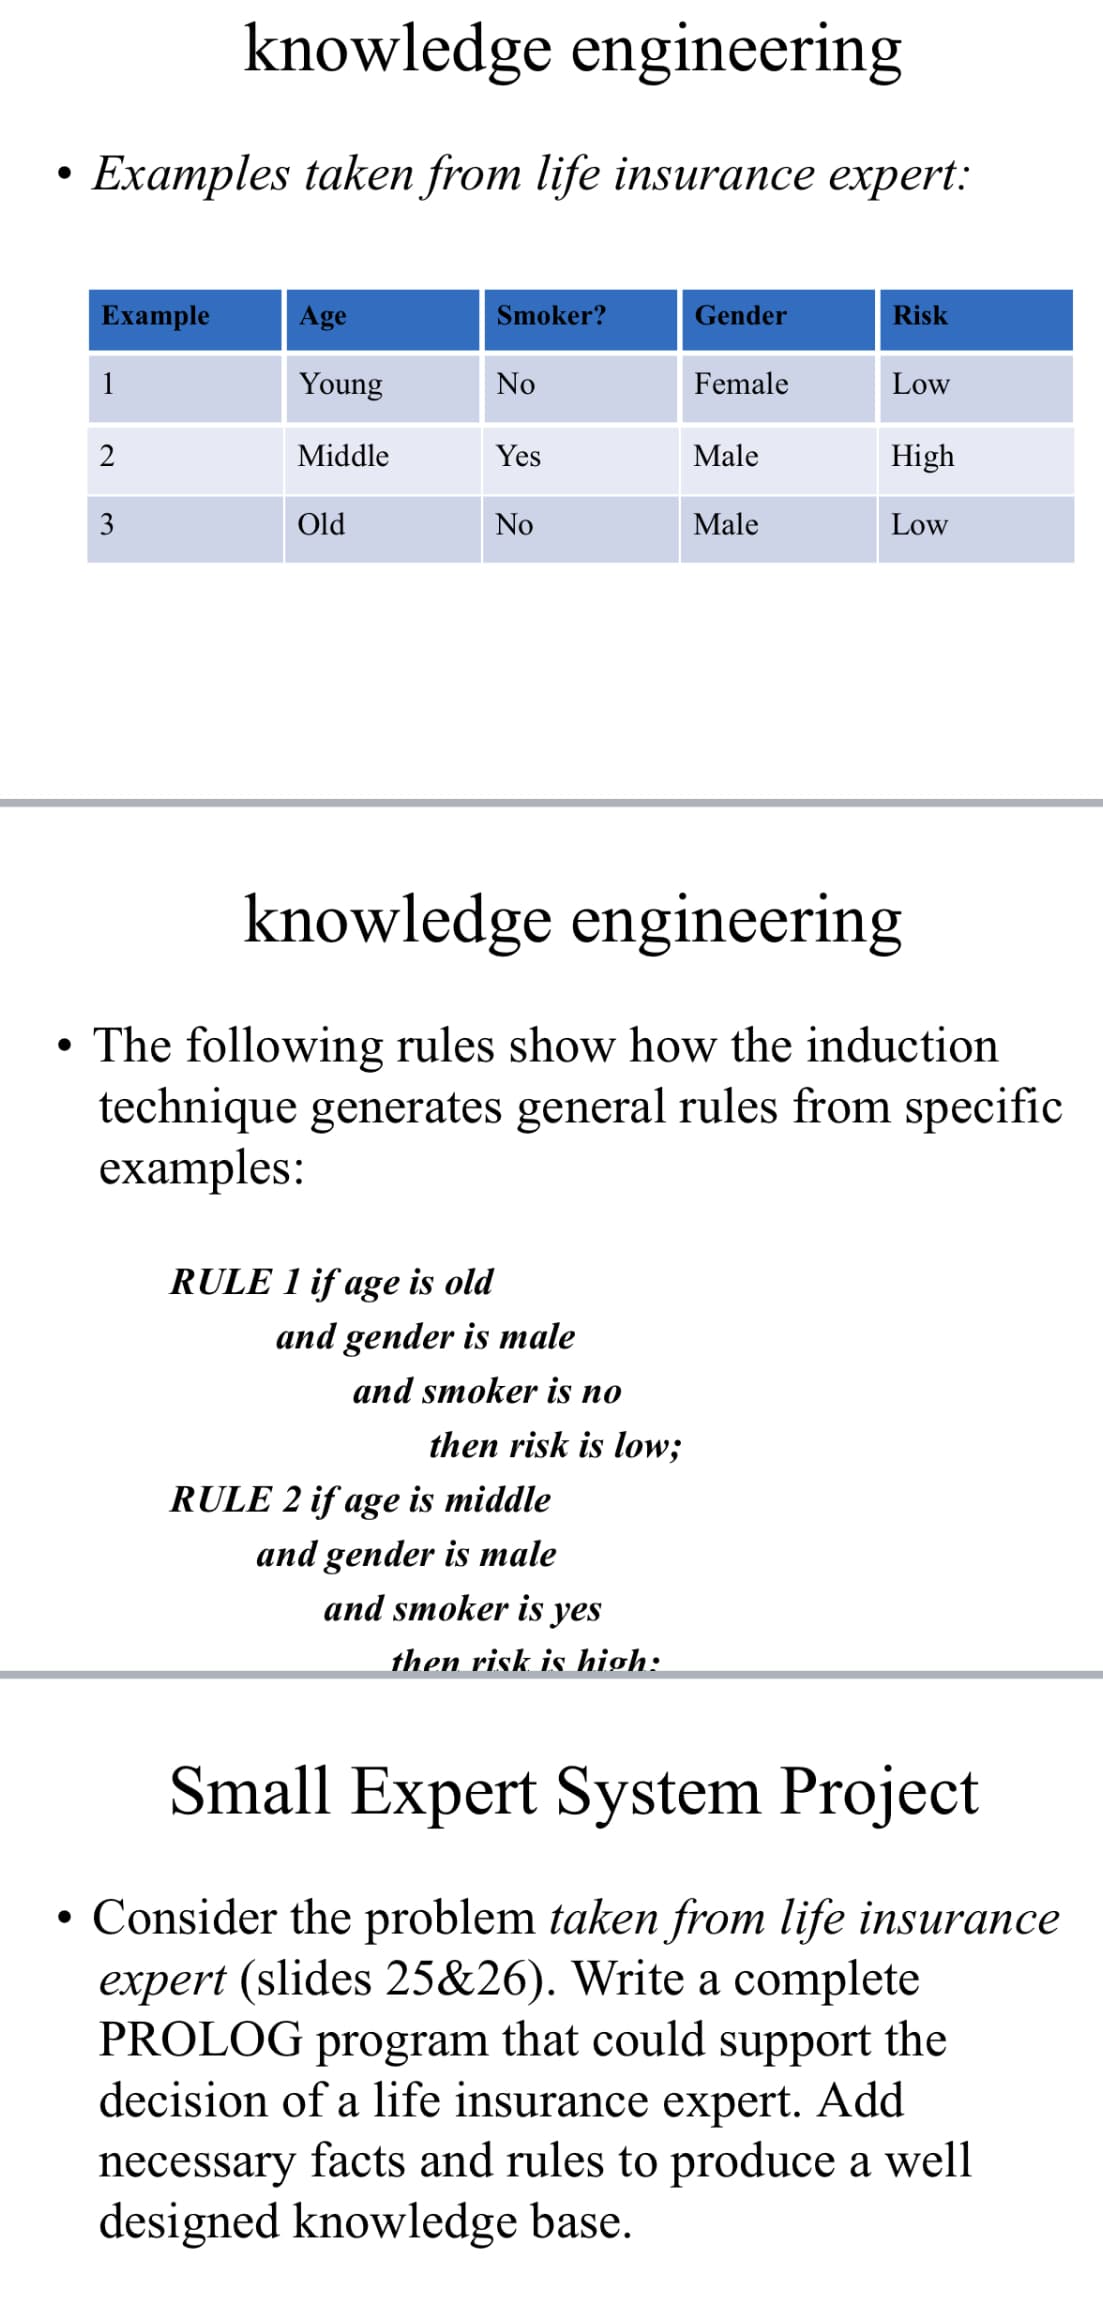 knowledge engineering
• Examples taken from life insurance expert:
Example
Age
Smoker?
Gender
Risk
1
Young
No
Female
Low
2
Middle
Yes
Male
High
3
Old
No
Male
Low
knowledge engineering
• The following rules show how the induction
technique generates general rules from specific
examples:
RULE 1 if age is old
and gender is male
and smoker is no
then risk is low;
RULE 2 if age is middle
and gender is male
and smoker is yes
then risk is high:
Small Expert System Project
• Consider the problem taken from life insurance
expert (slides 25&26). Write a complete
PROLOG program that could support the
decision of a life insurance expert. Add
necessary facts and rules to produce a well
designed knowledge base.
